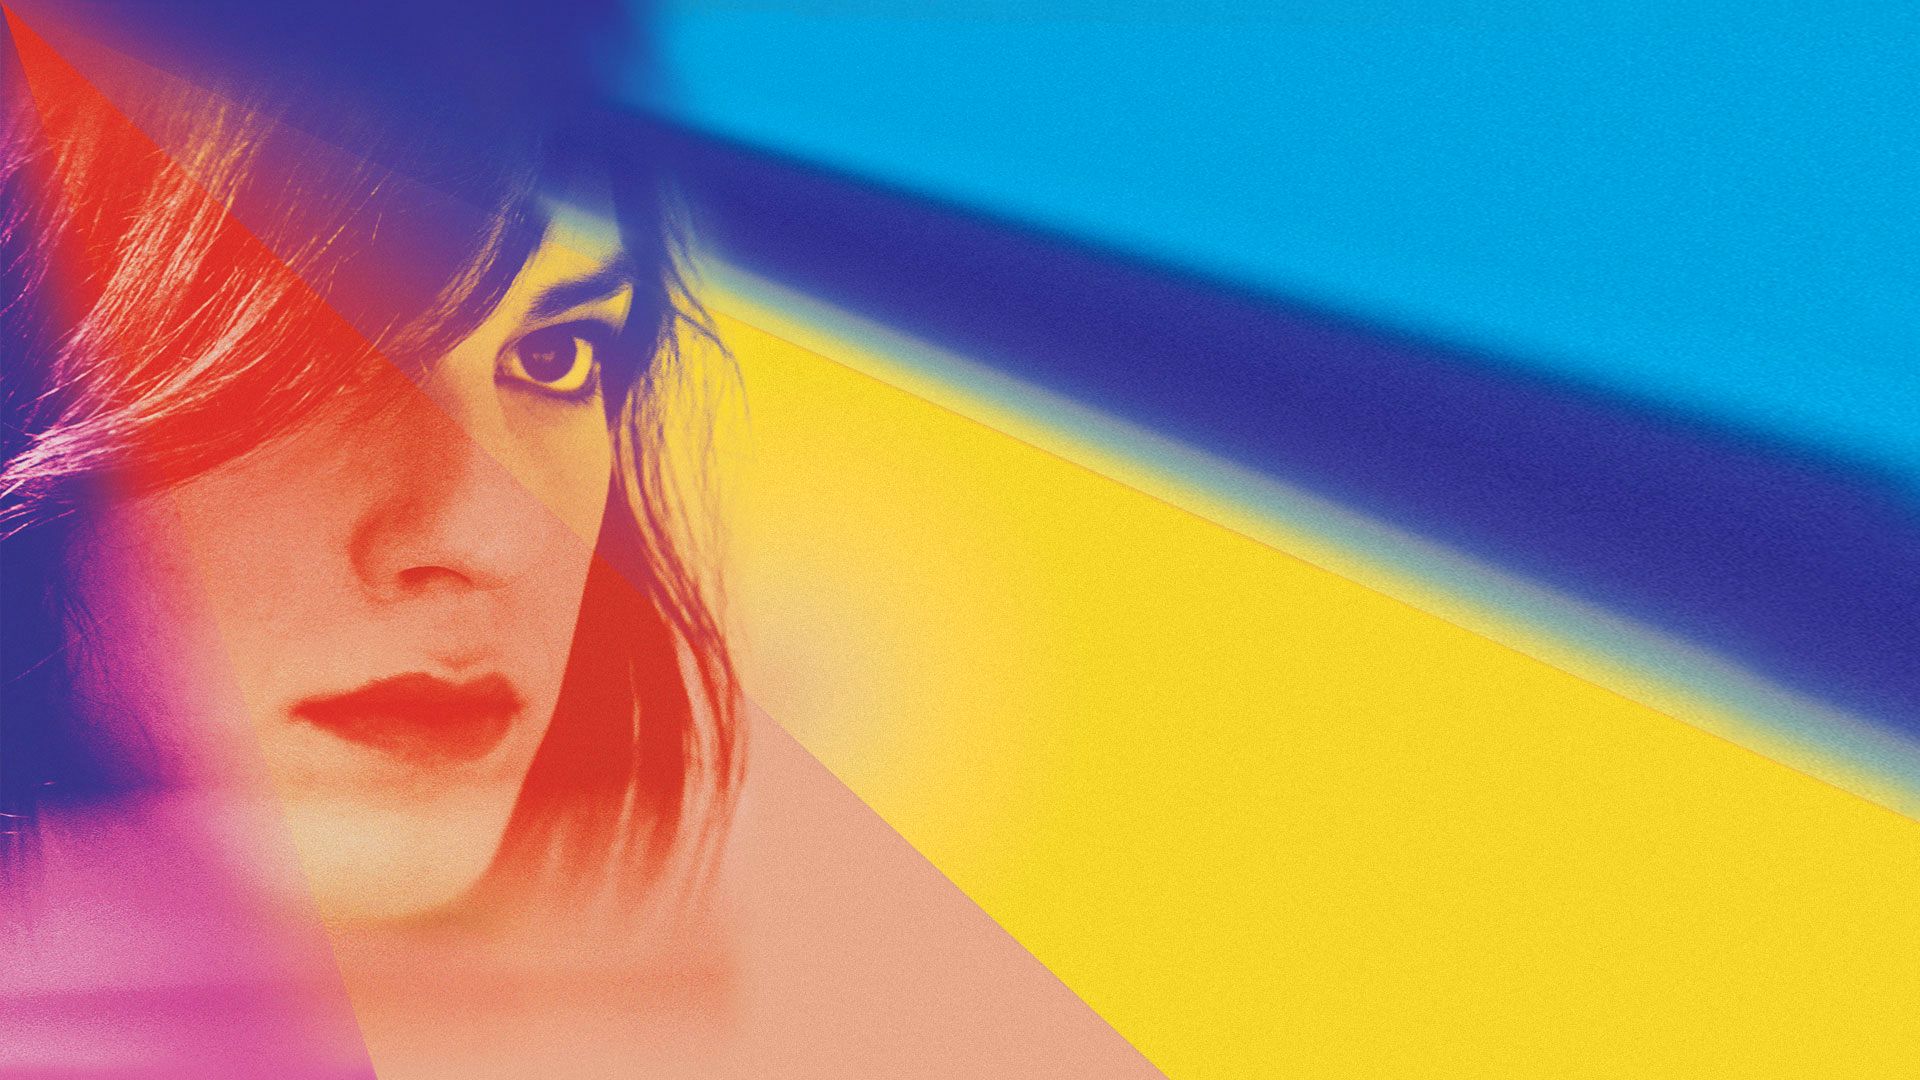 A Fantastic Woman background